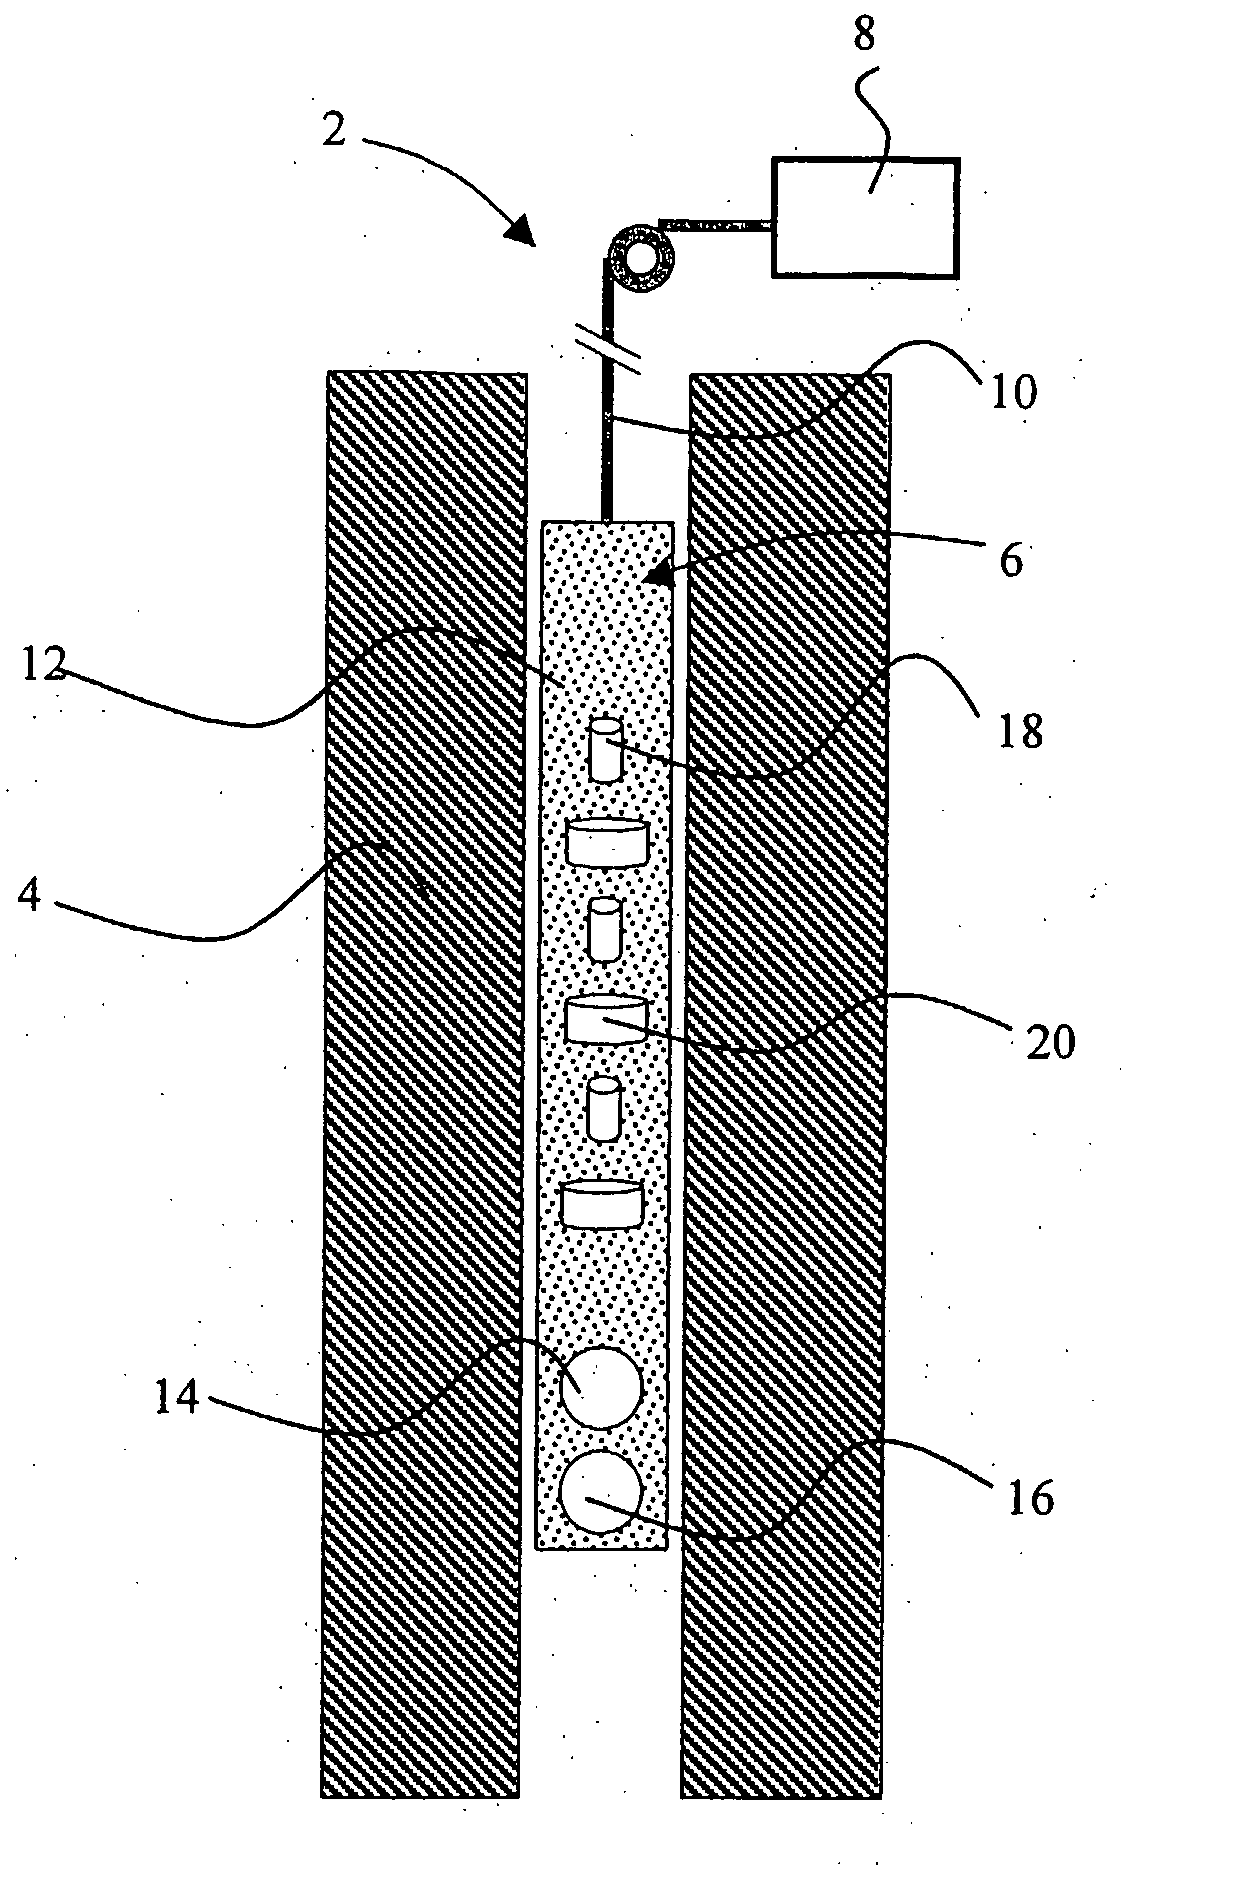 Method and Apparatus for Determining the Permeability of Earth Formations